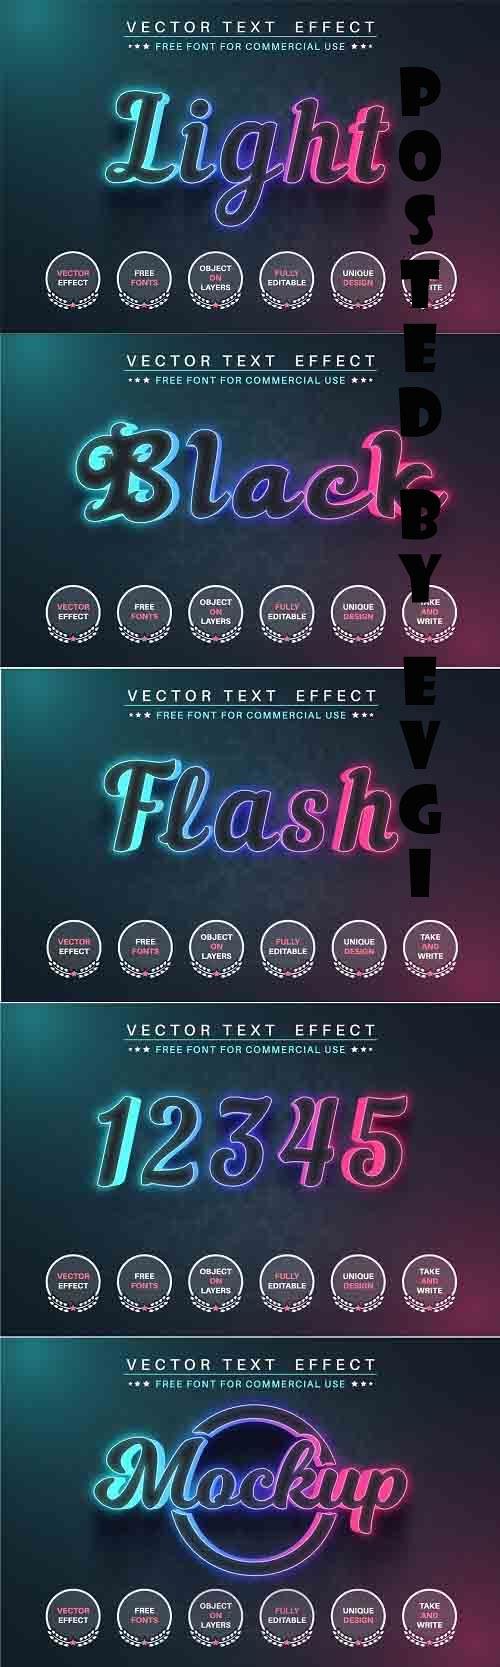 Color glow - editable text effect - 6145212